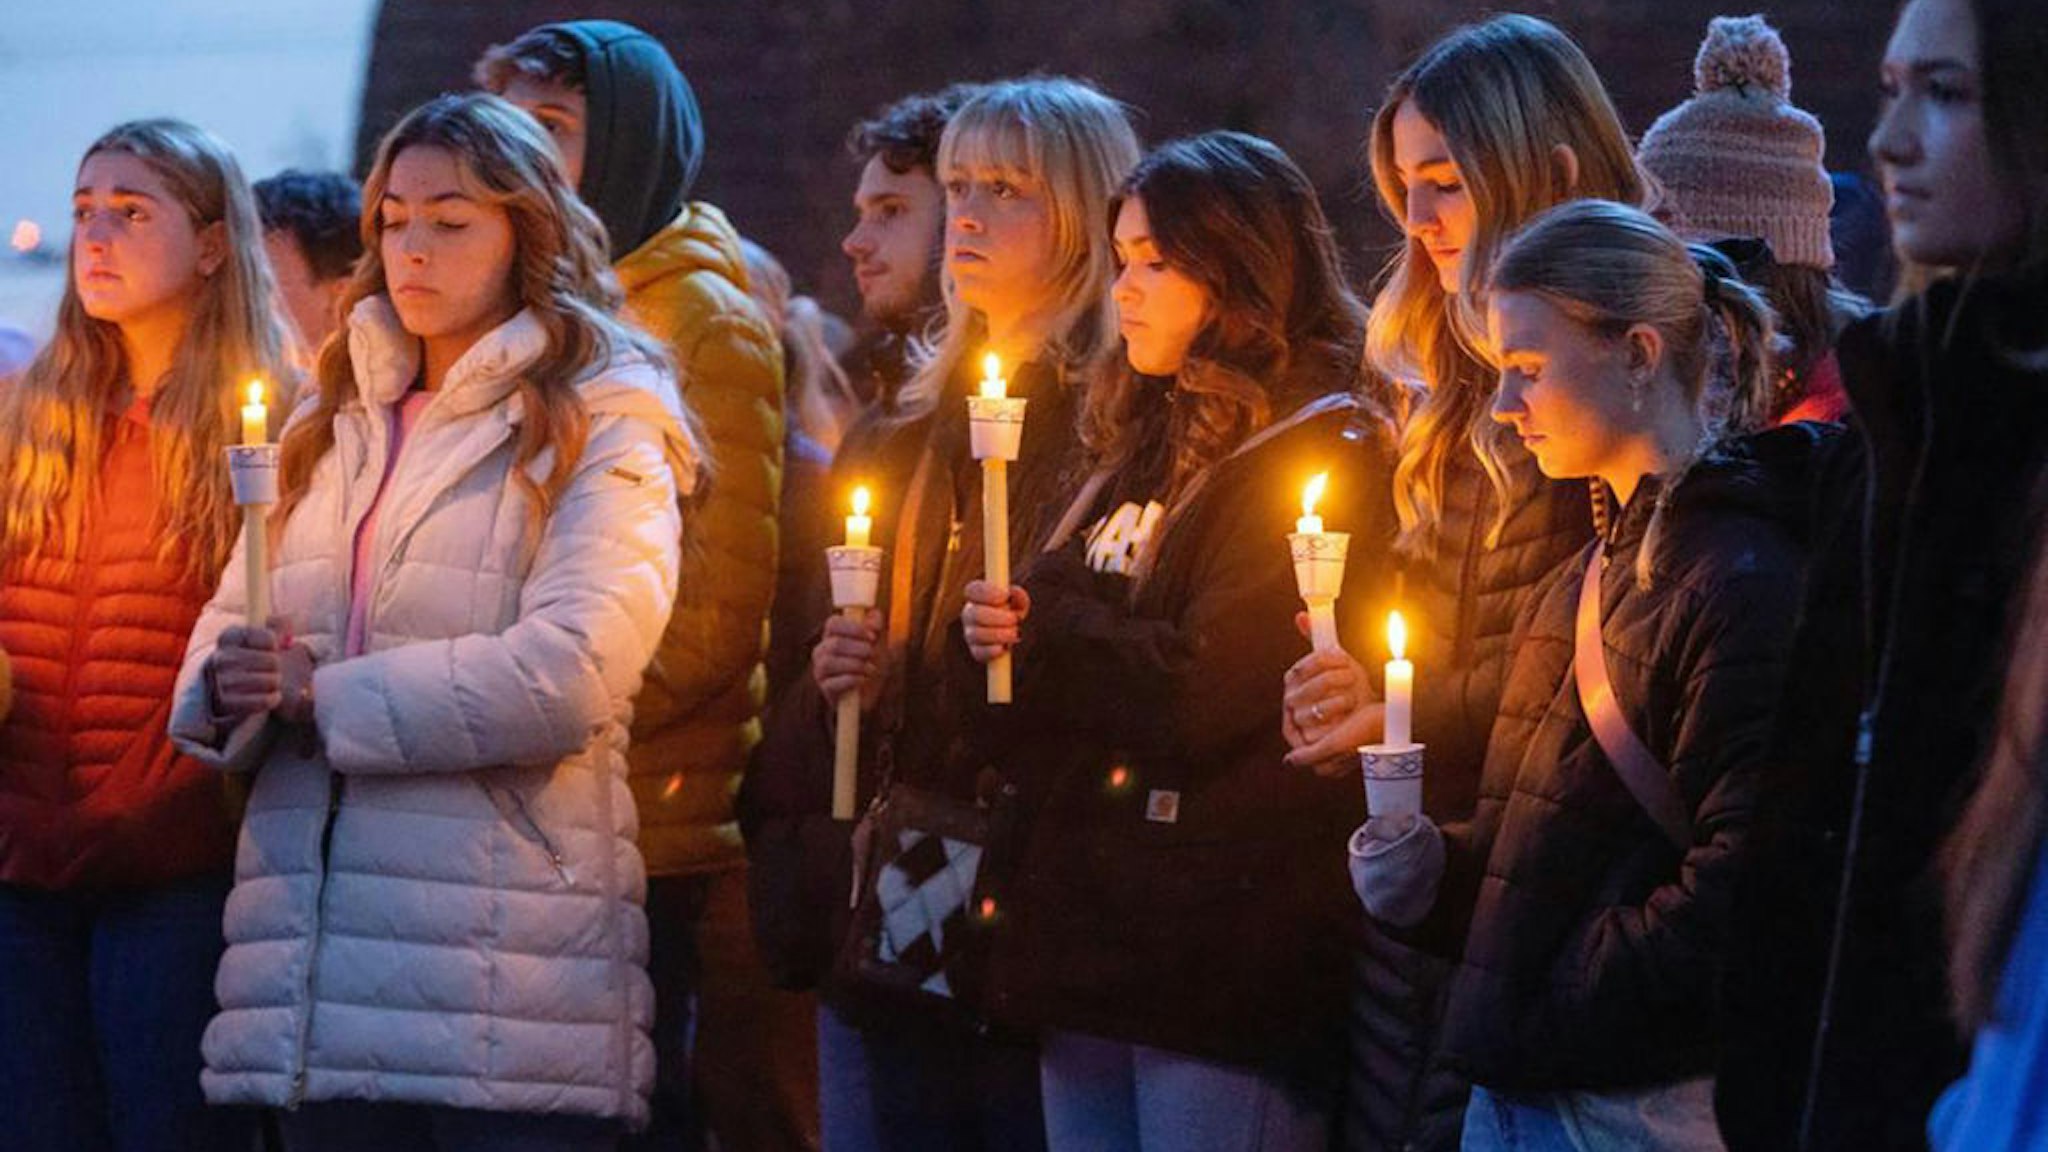 Boise State University students and people who knew the University of Idaho students who were killed in Moscow, Idaho, pay tribute at a vigil on Nov. 17, 2022, at BSU.